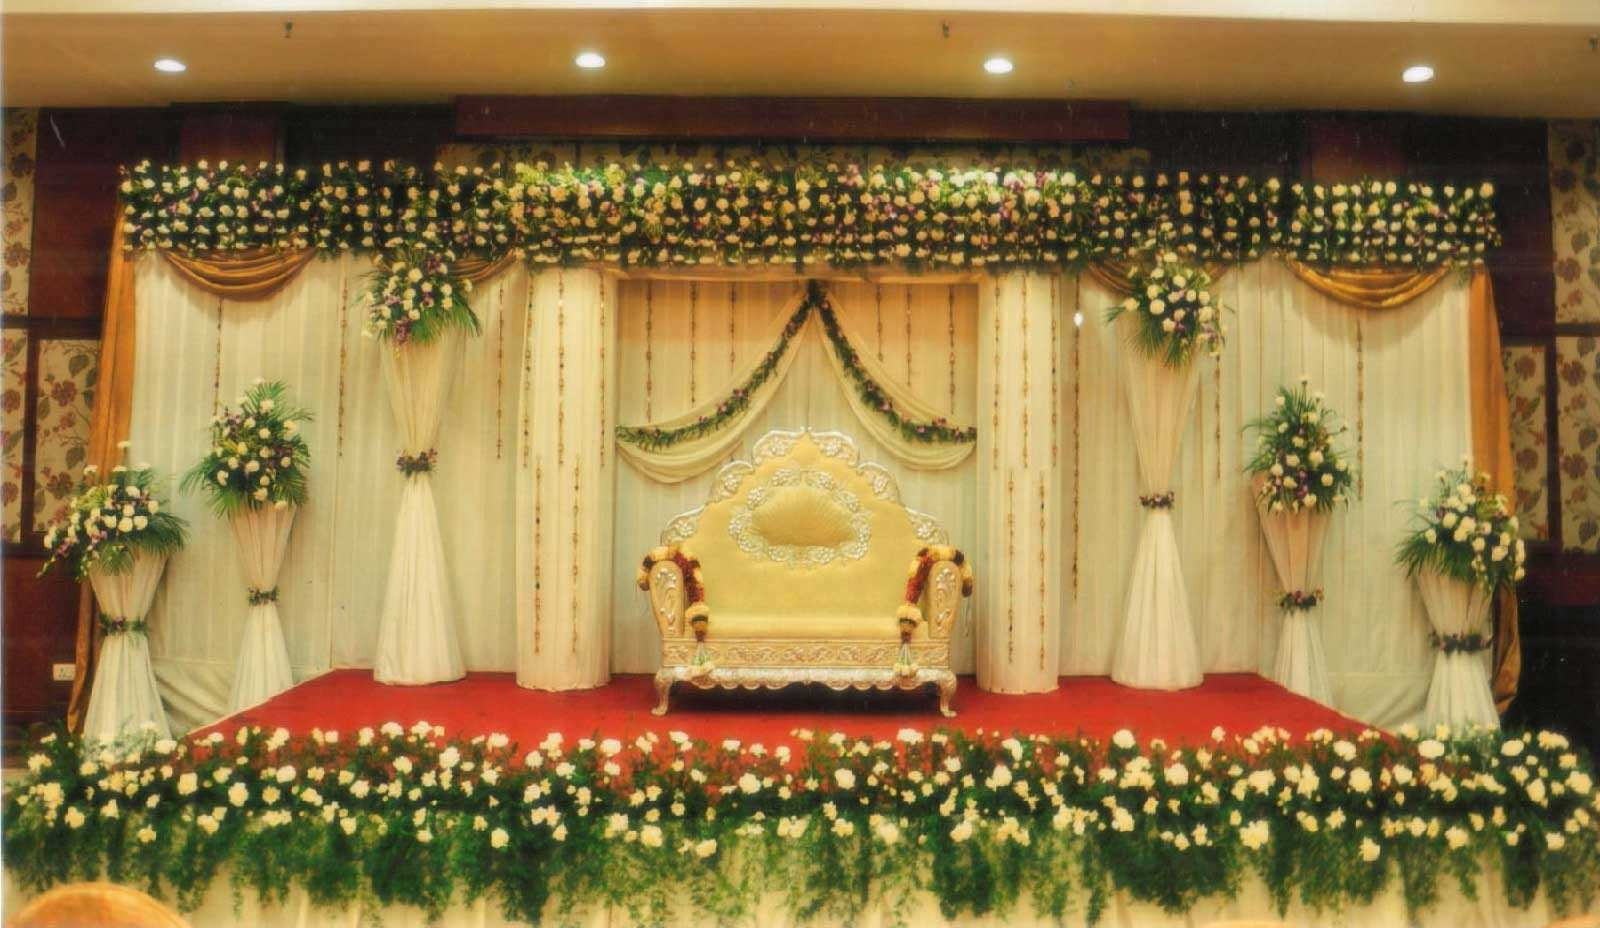 Easy Decorations for The Wedding Reception Christian Wedding Reception Decorations Wedding Decorations Referance